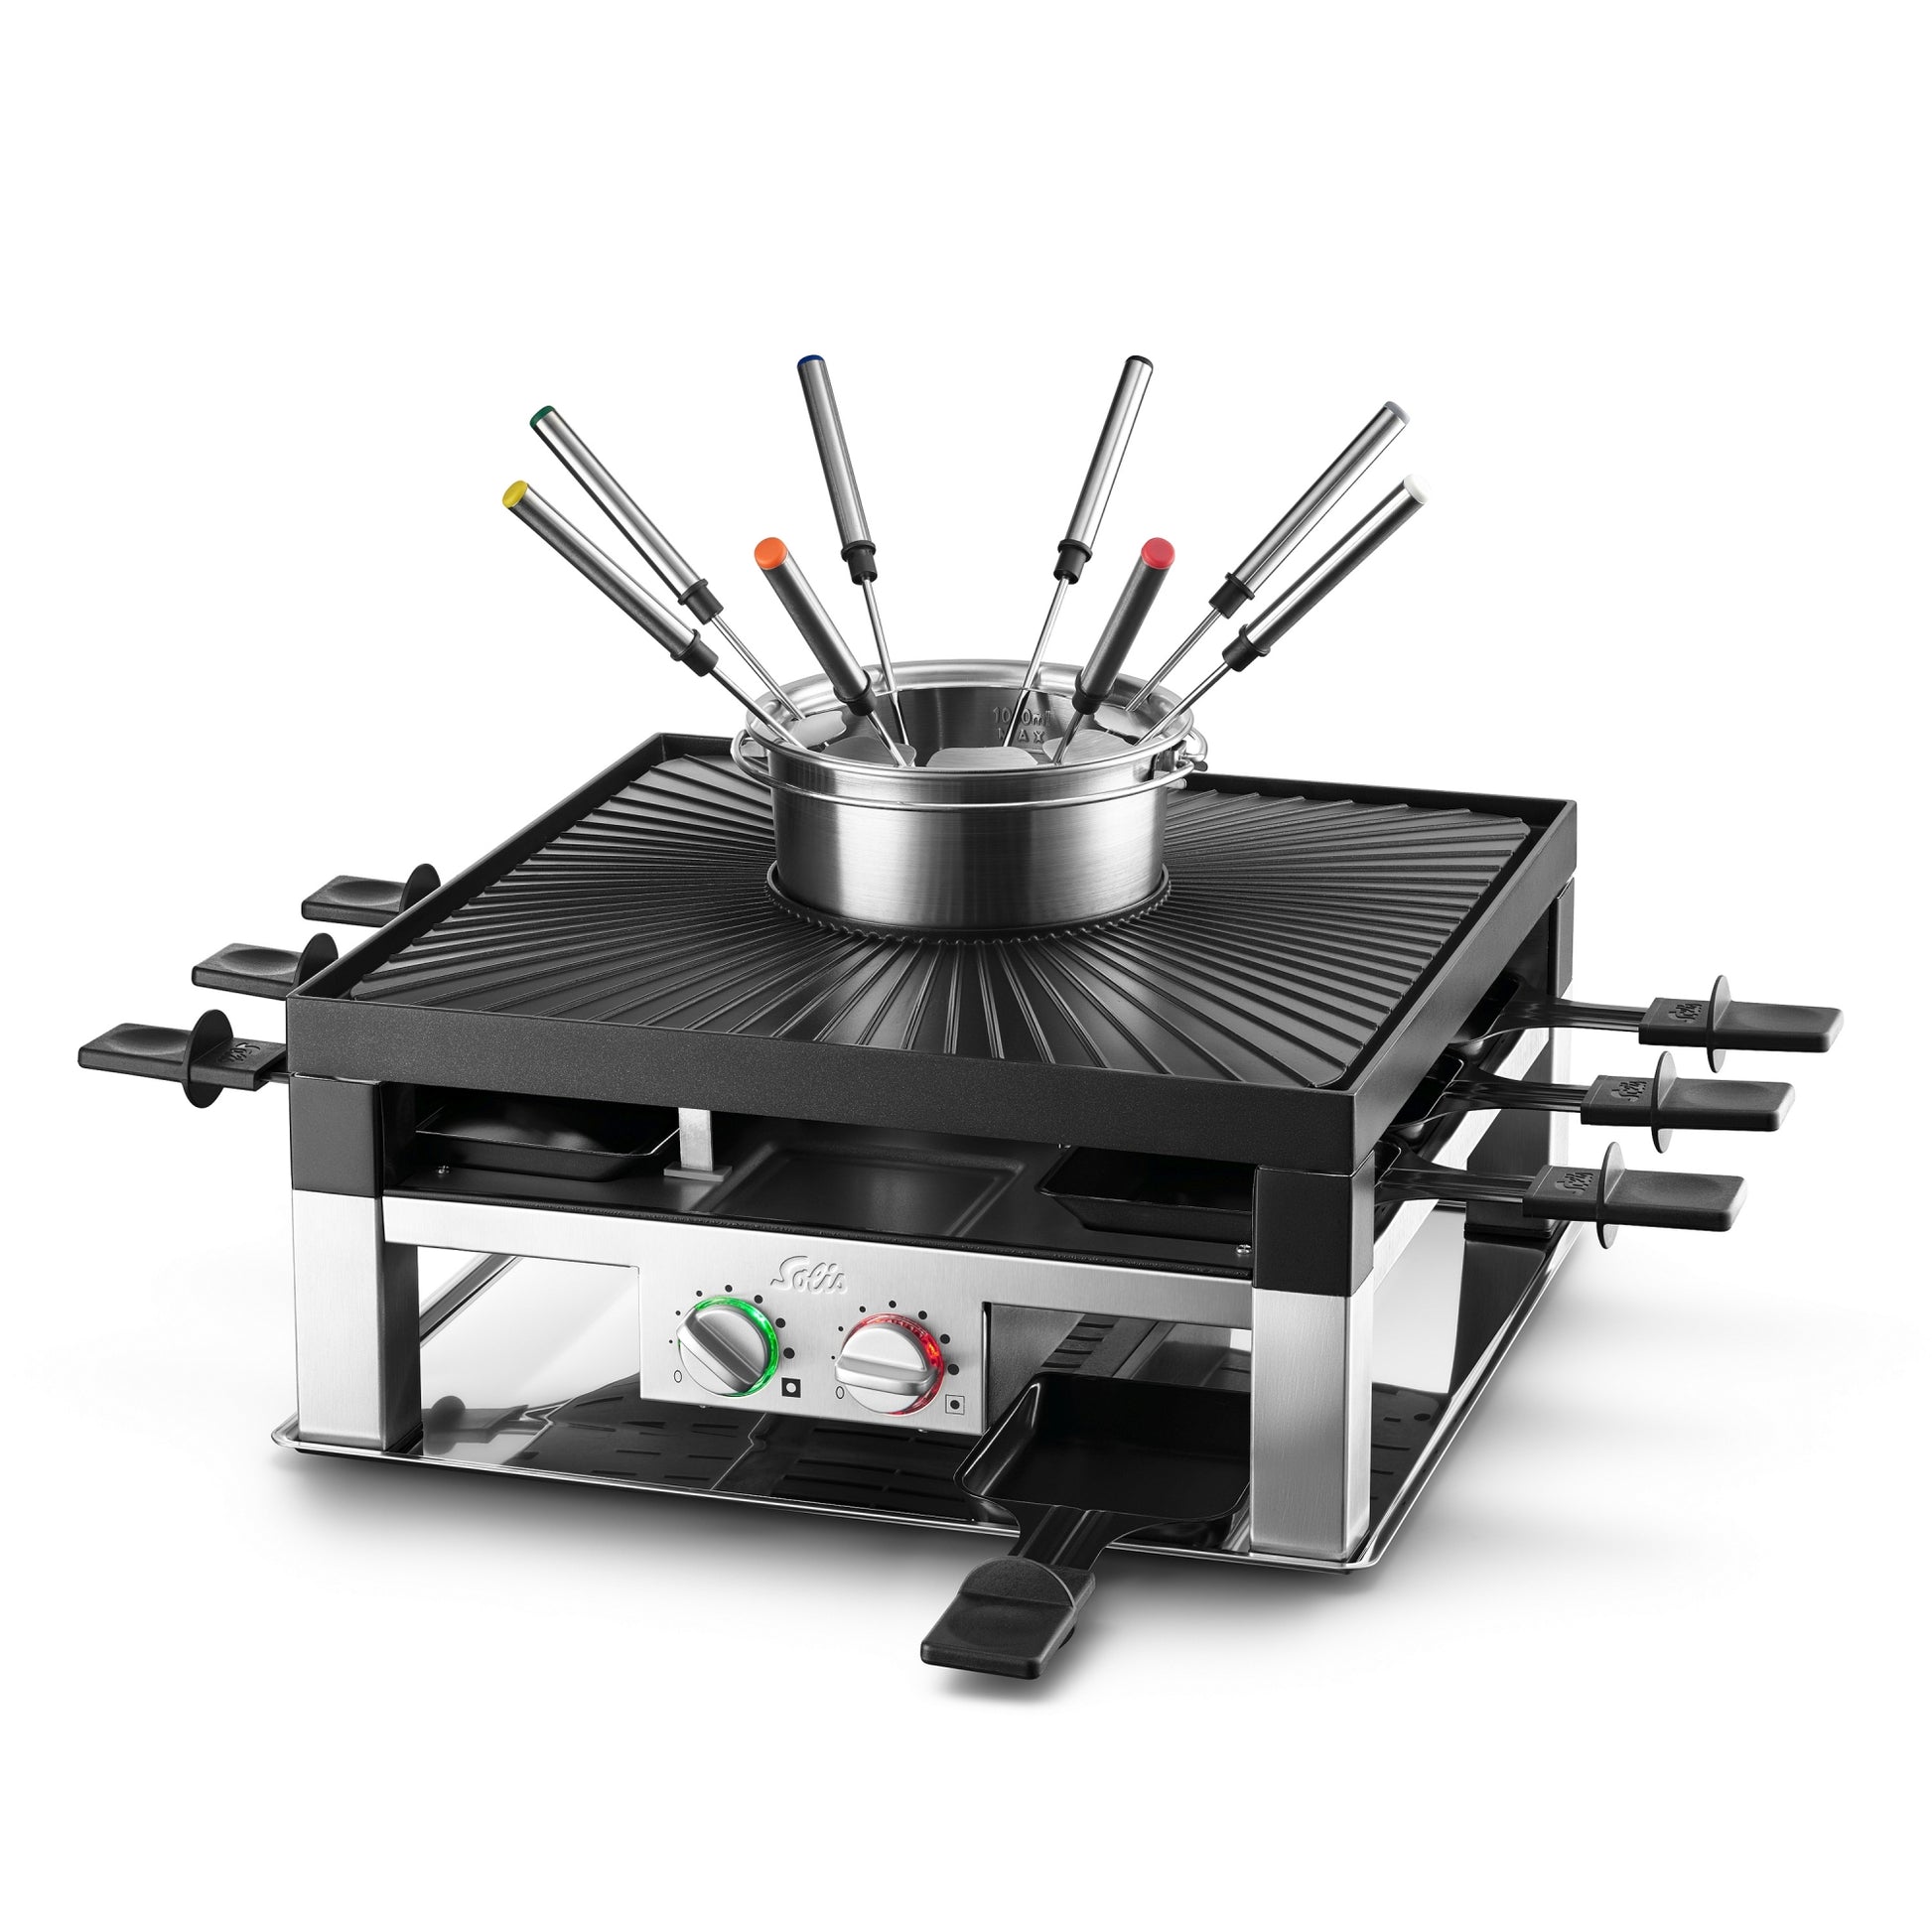 Combi-Grill 3 in 1 (Typ 796) B-Ware